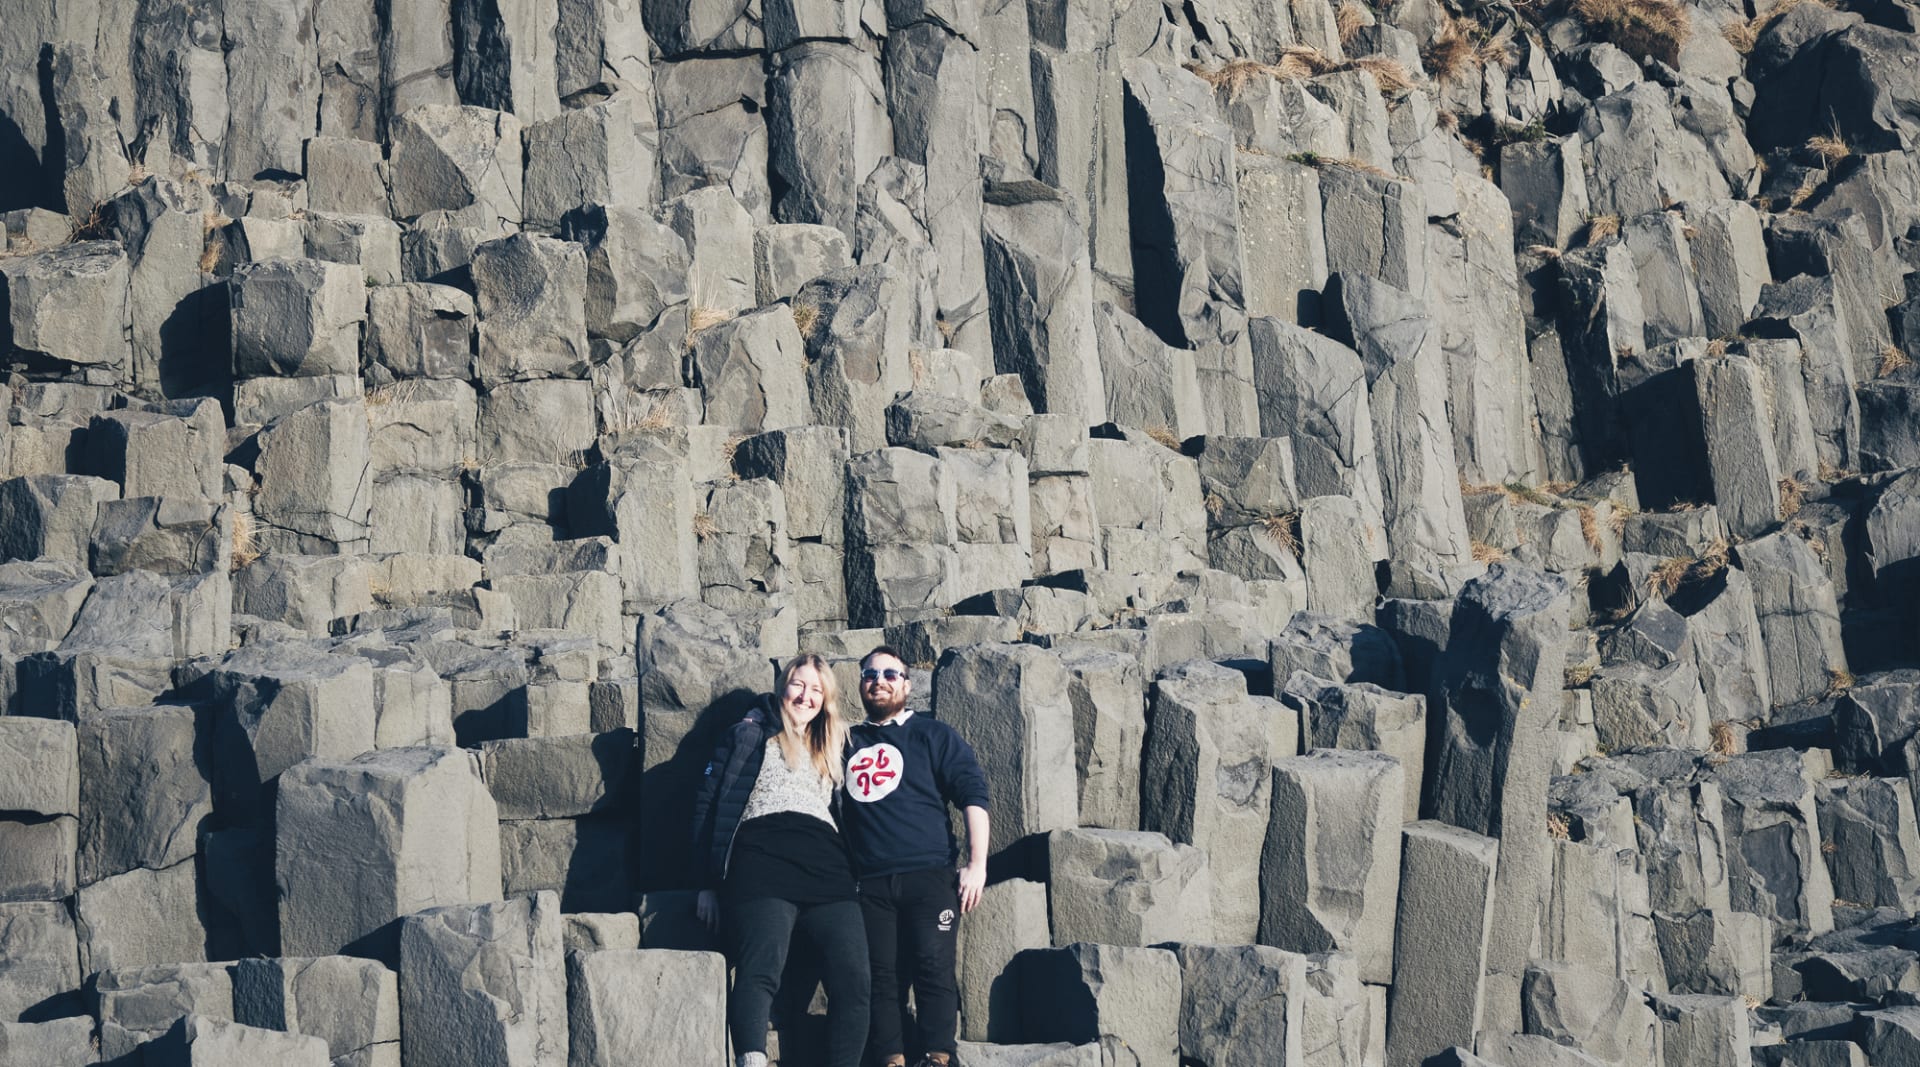 Becoming one with nature on top of basalt columns in Reynisfjara beach Iceland